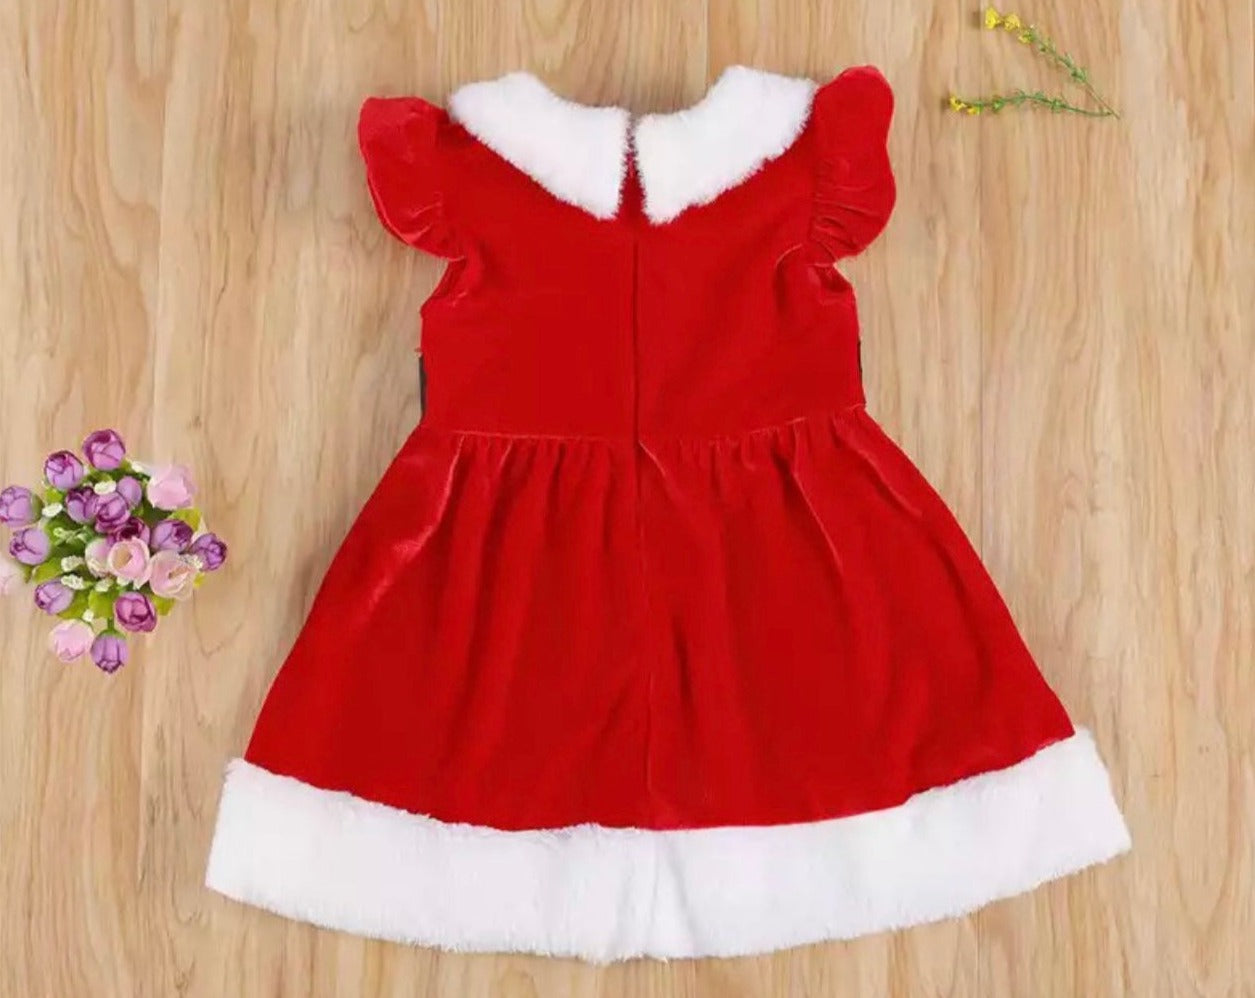 Buy Santa Claus Dress Costume for Boys Girls Kids (0- 6 Months) by Mobison  Online at Low Prices in India - Amazon.in